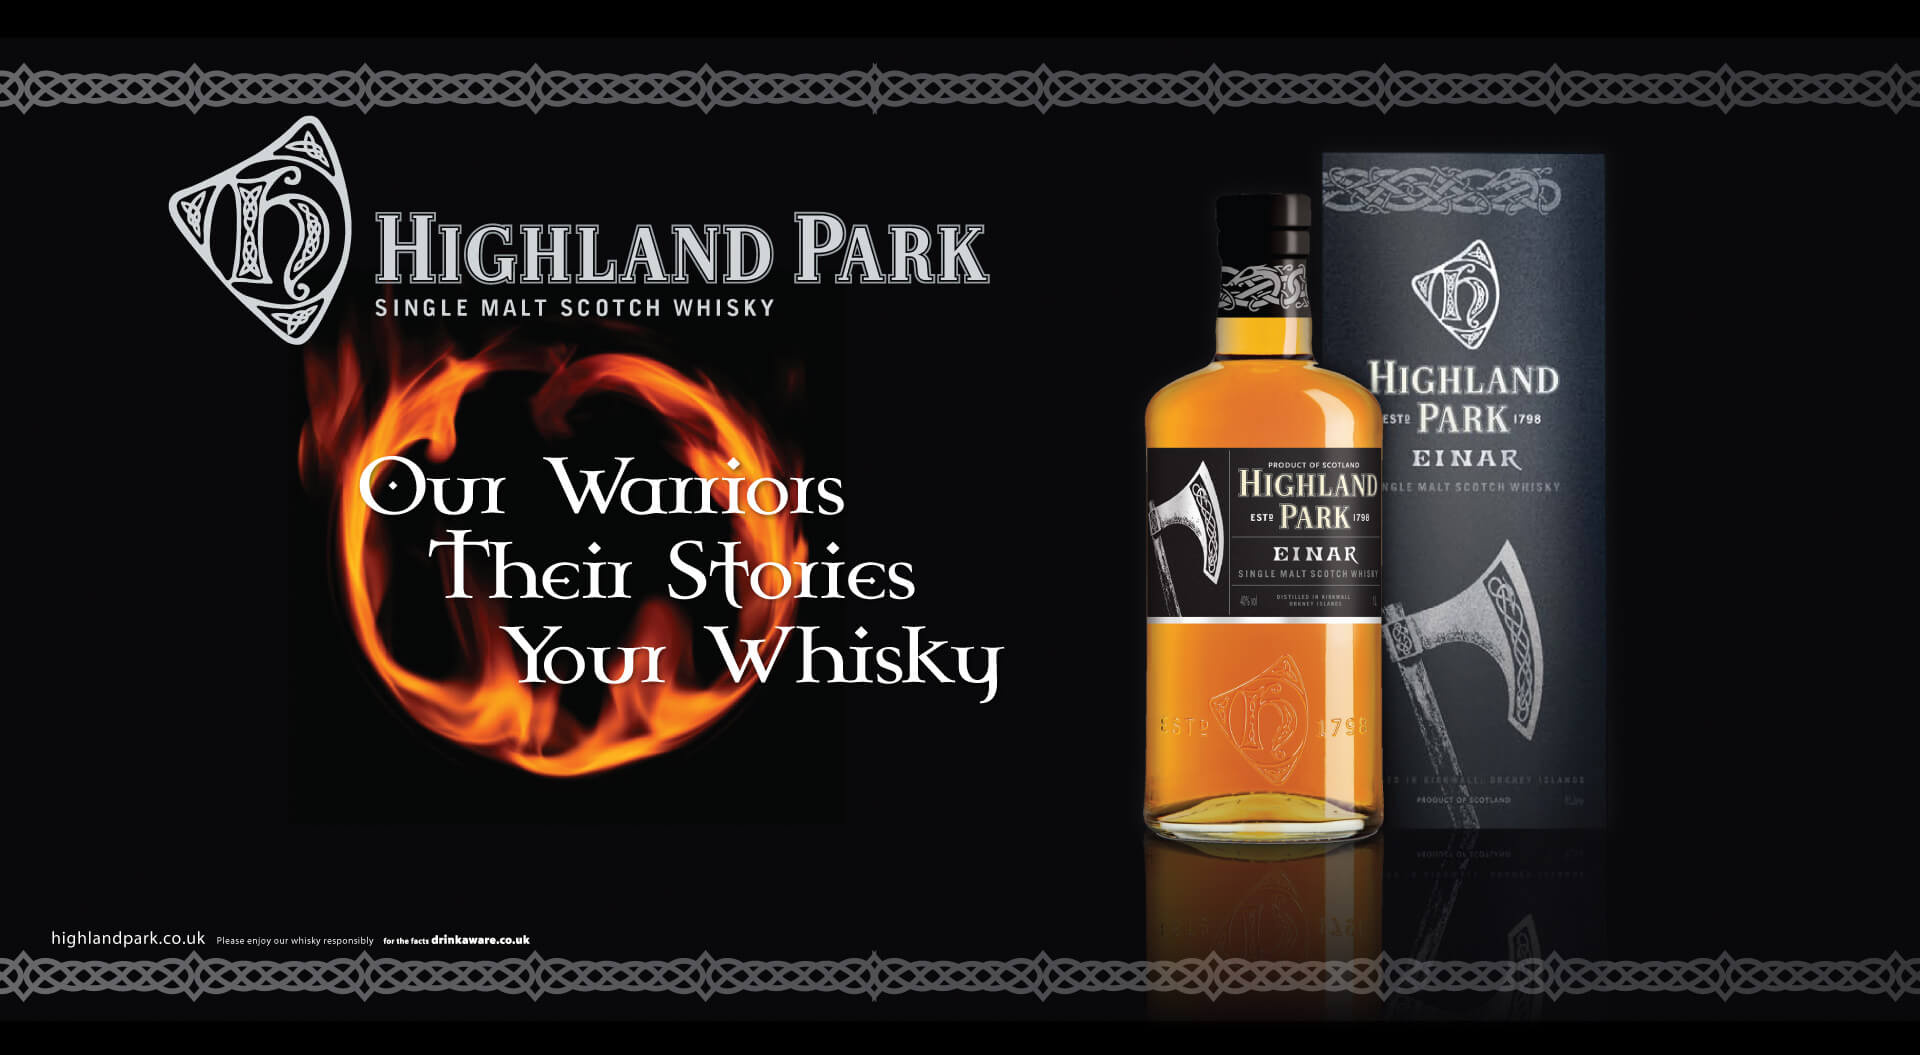 Highland Park Single Malt Scotch Whisky packaging design for Einar, our wariers, their stories your whisky brand marketing for airports duty free